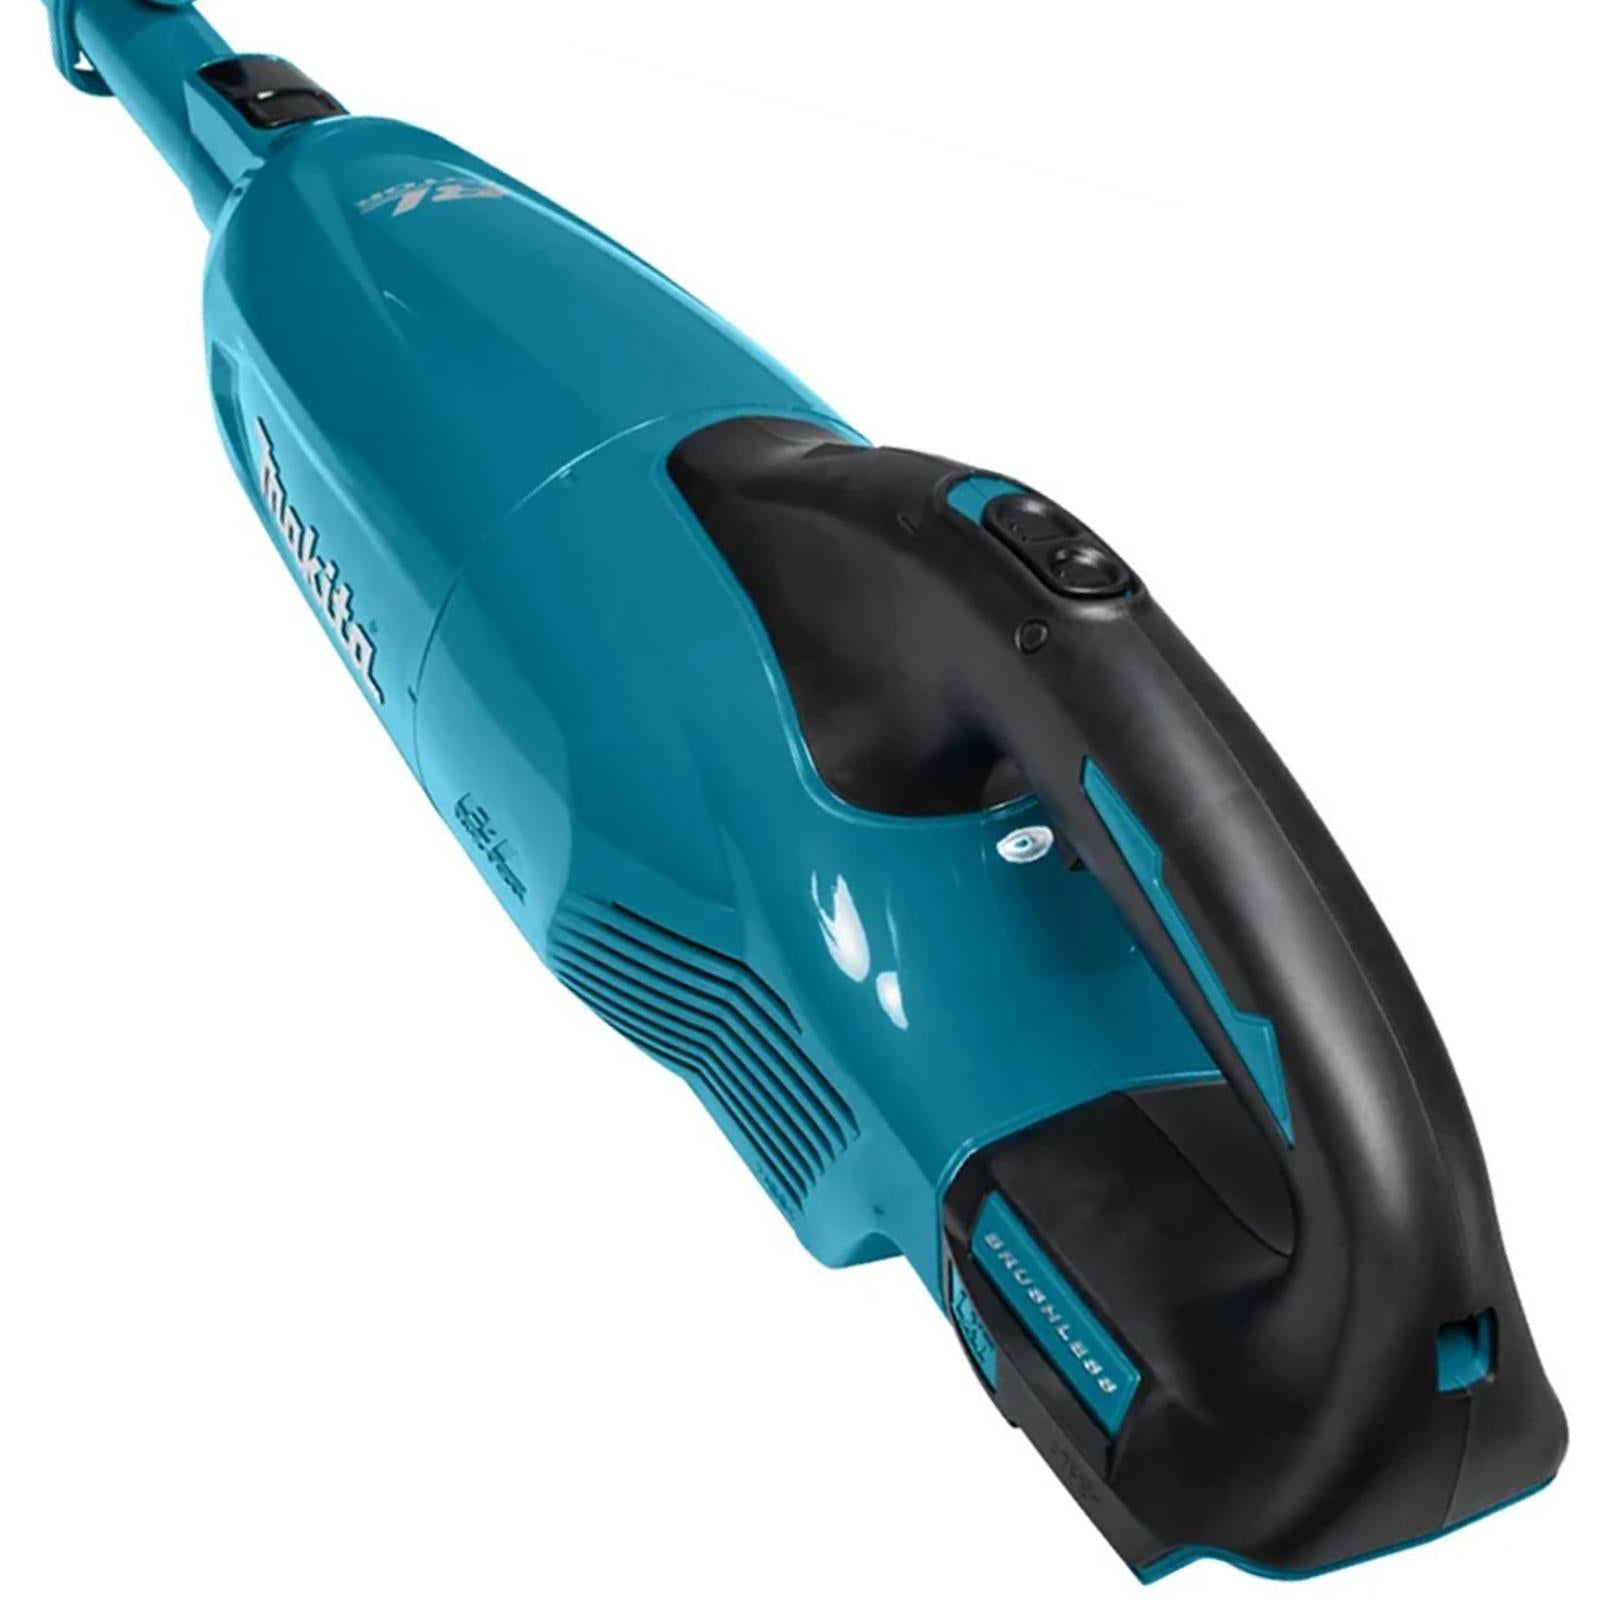 Makita Vacuum Cleaner 18V LXT Brushless Cordless 750ml DCL280FZ Body Only